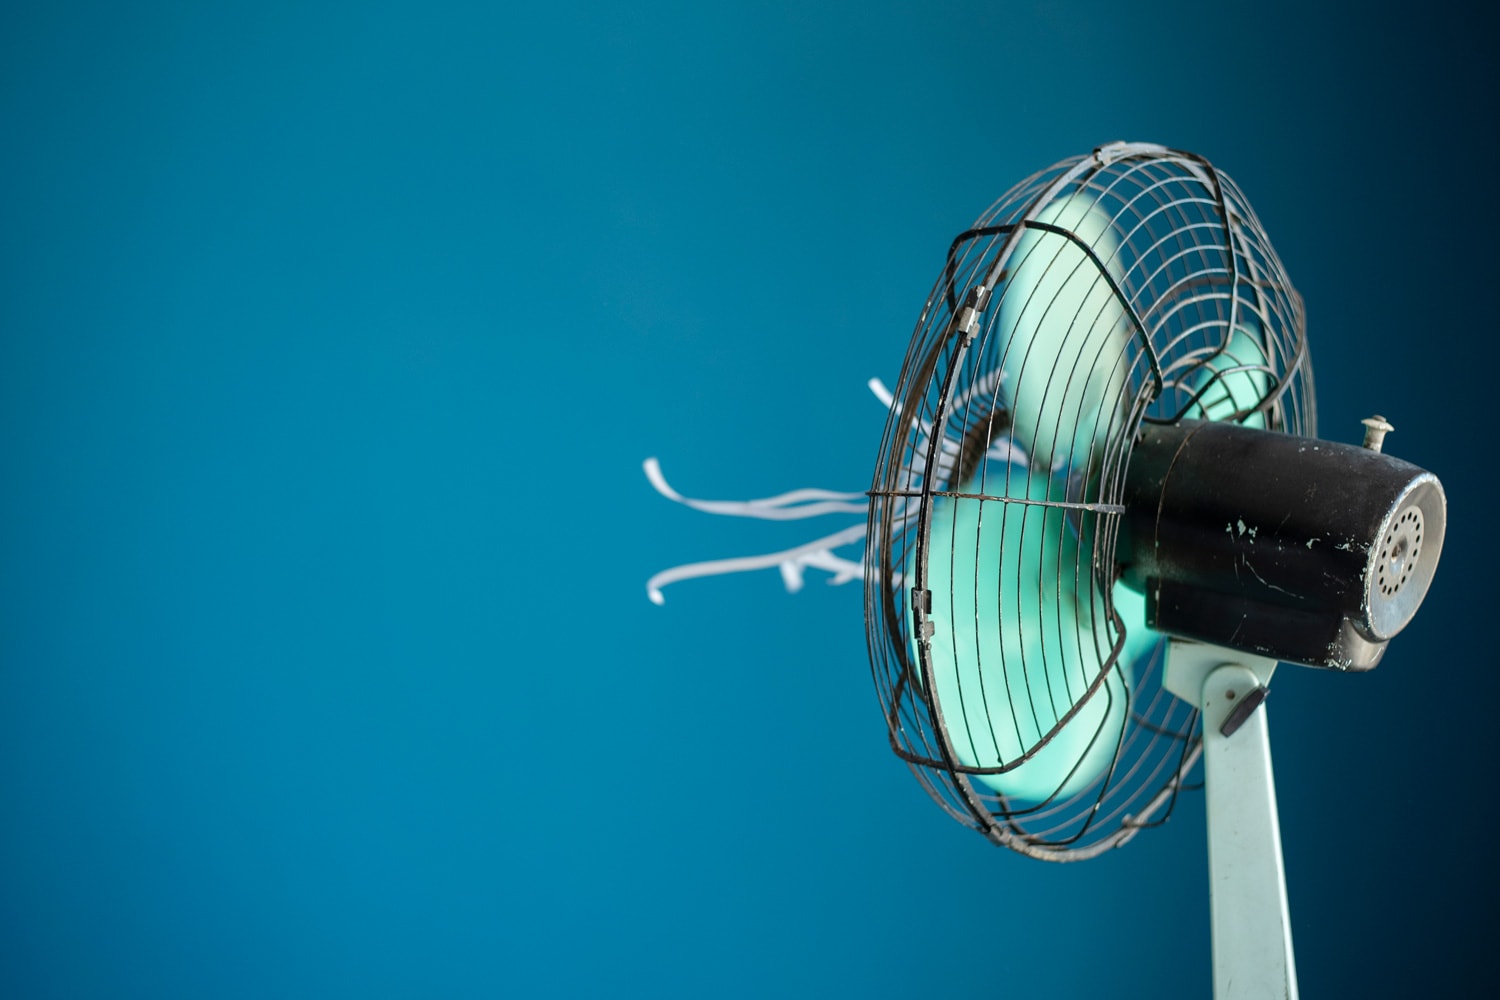 Shot of a metal electric fan with white streamers attached against a blue background